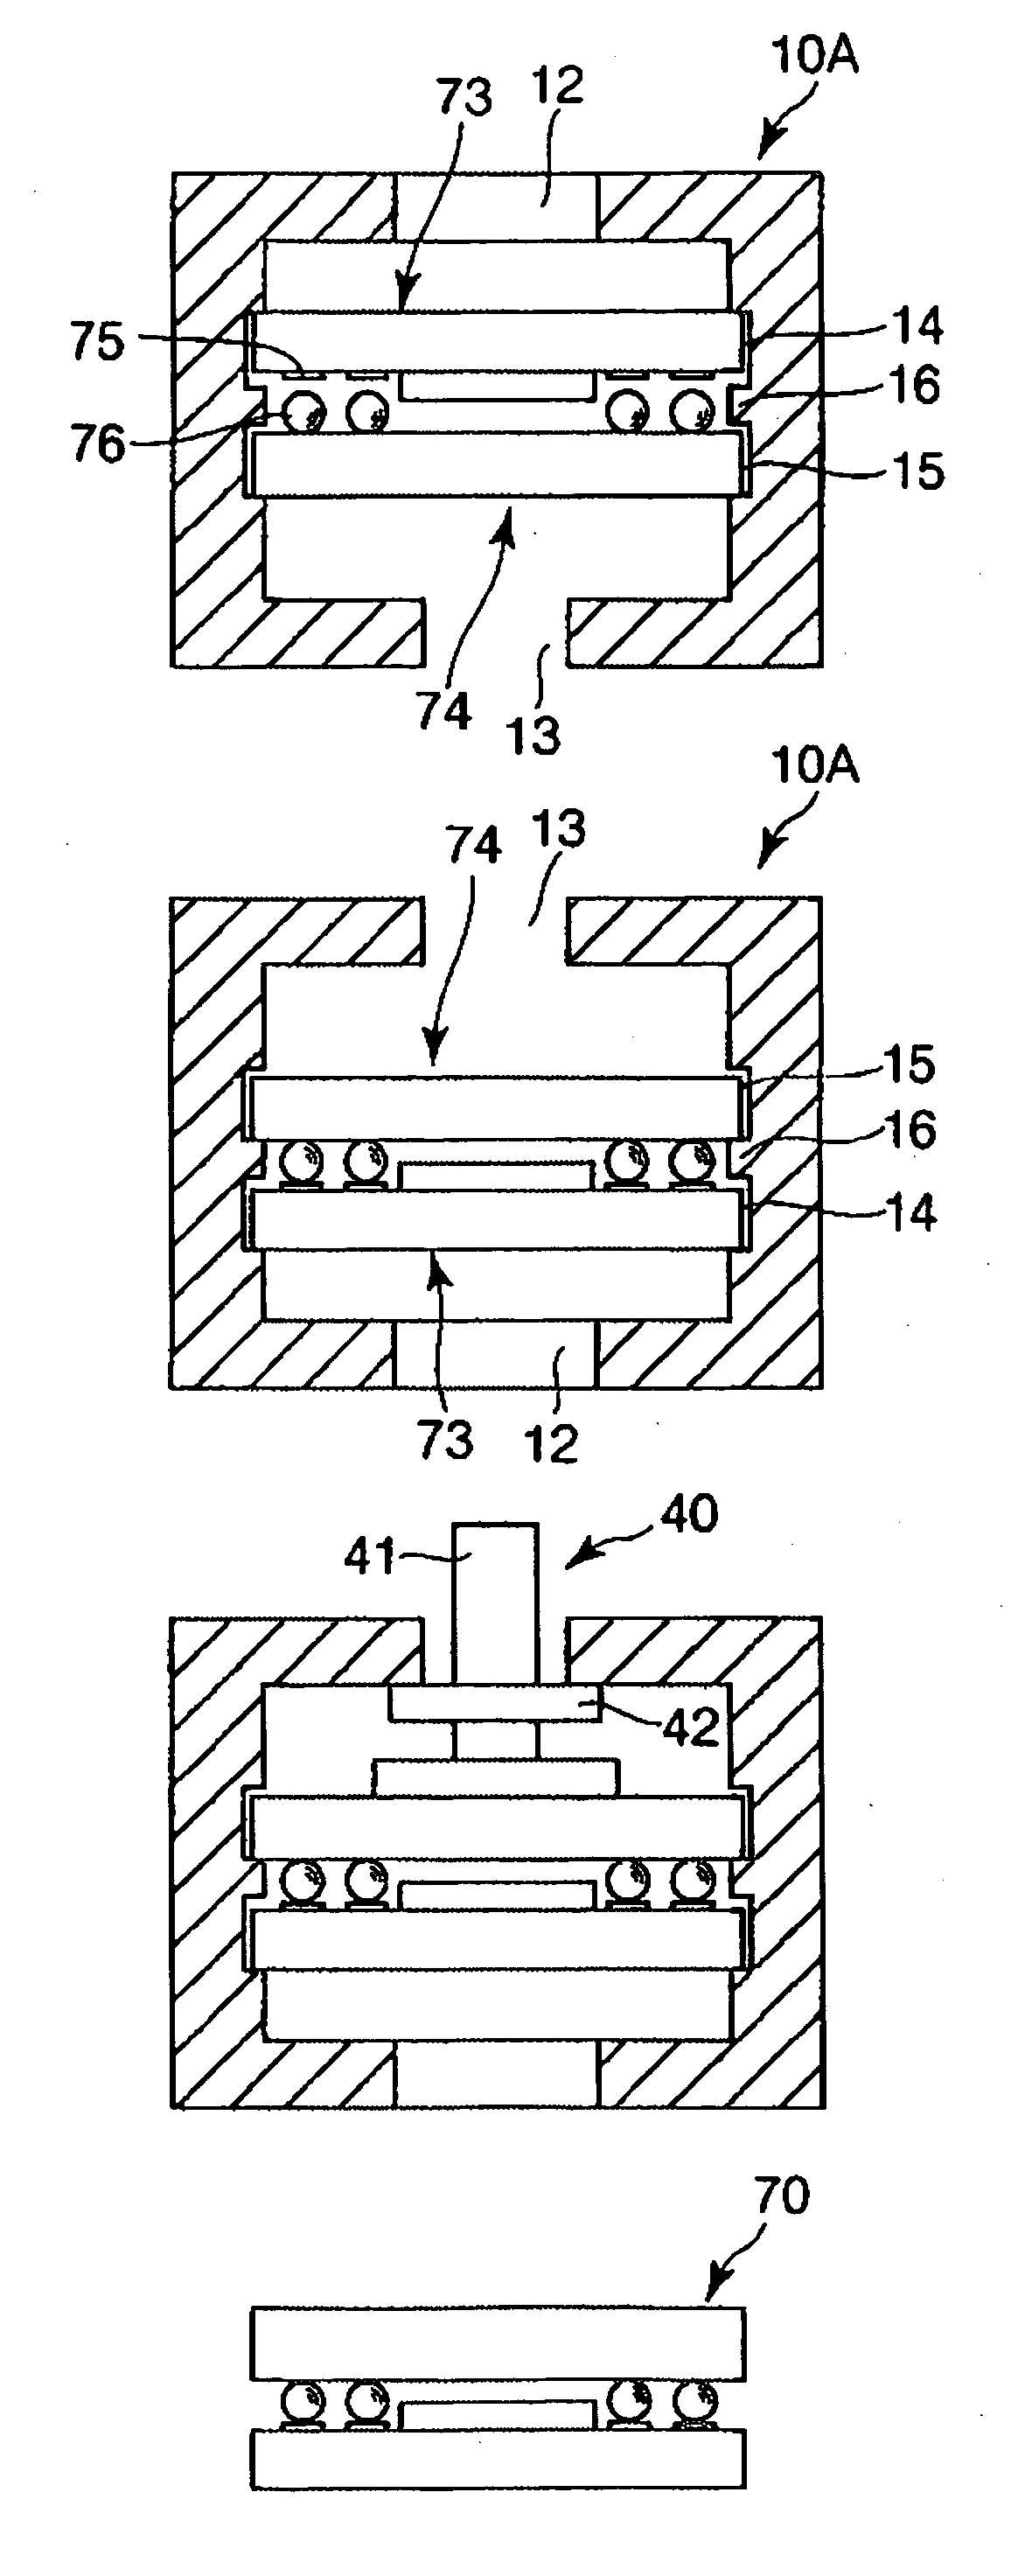 Apparatus used for manufacturing semiconductor device, method of manufacturing the semiconductor devices, and semiconductor device manufactured by the apparatus and method